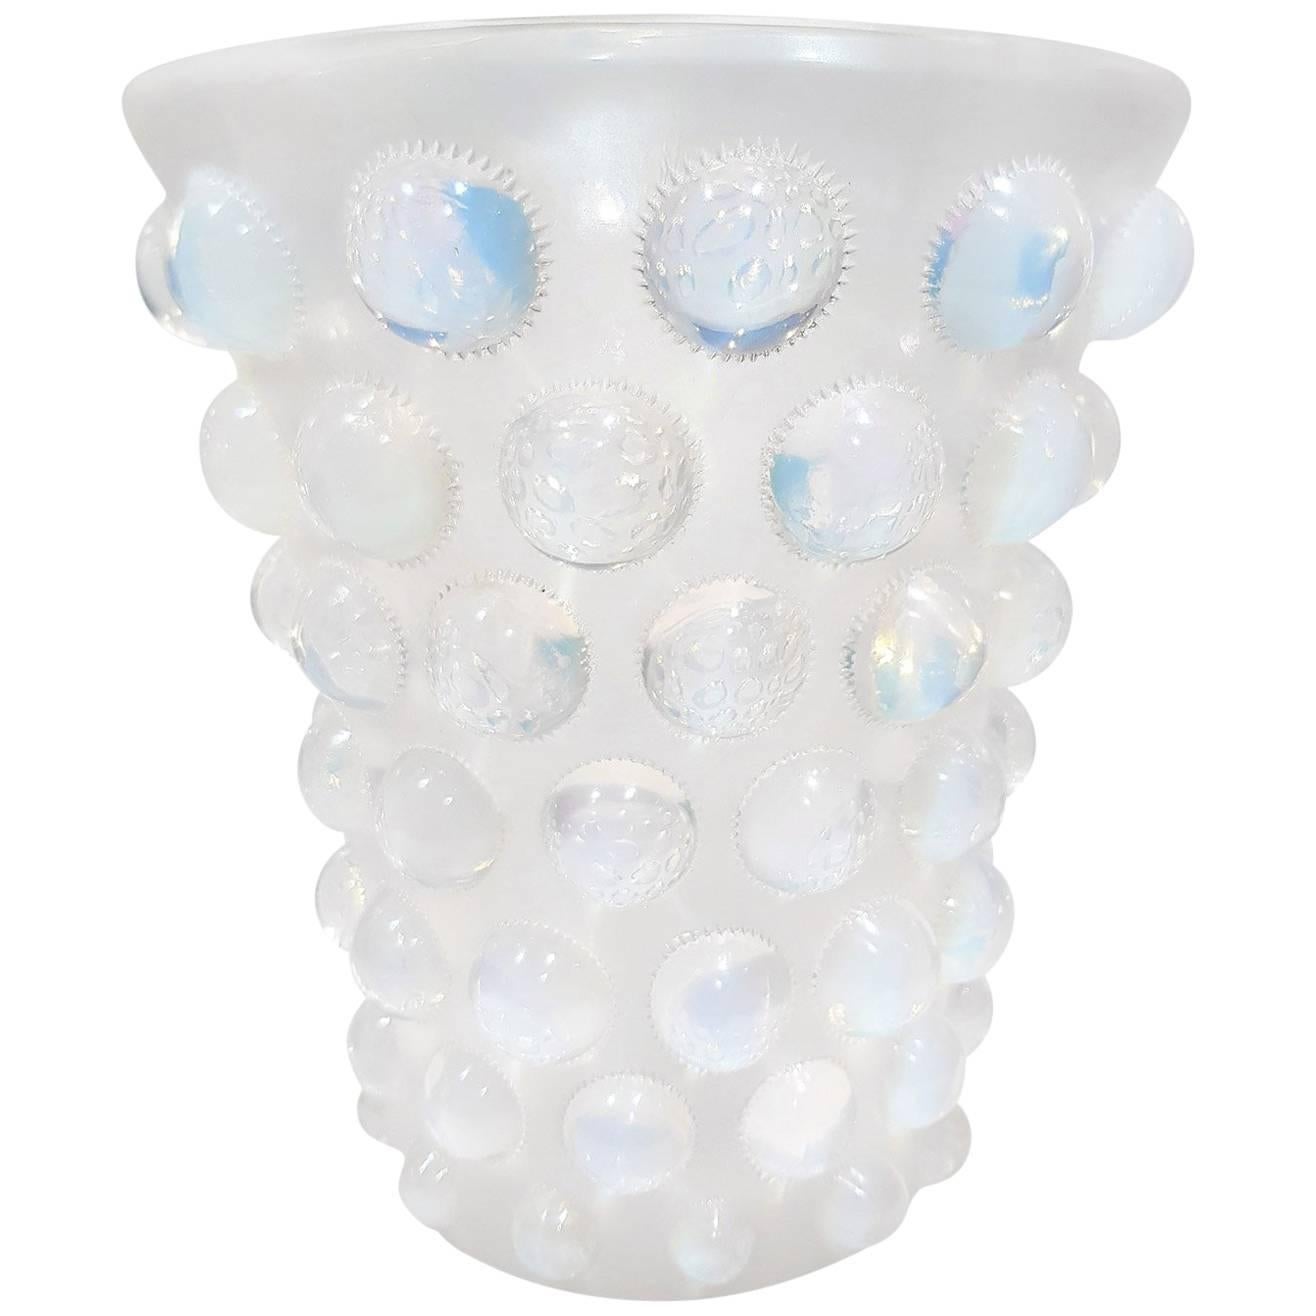 'Bammako', an Art Deco Opalescent Glass Vase by Rene Lalique For Sale